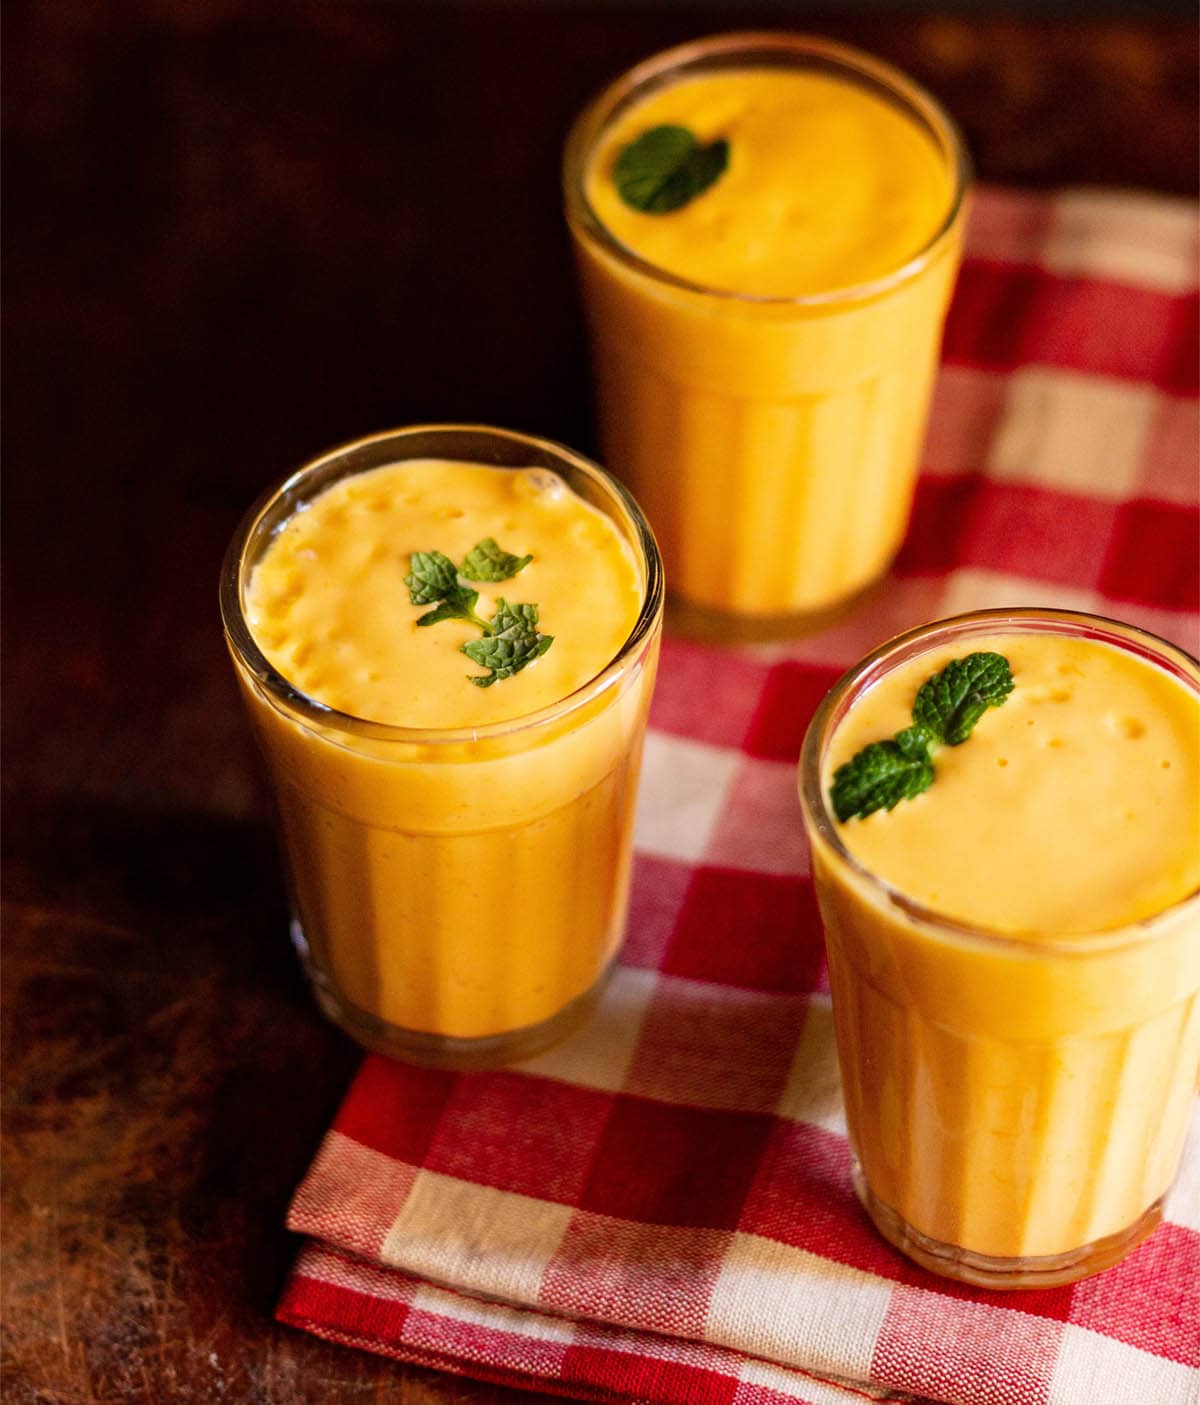 Traditional Indian Mango Lassi Recipe (With a Secret Tip) - An